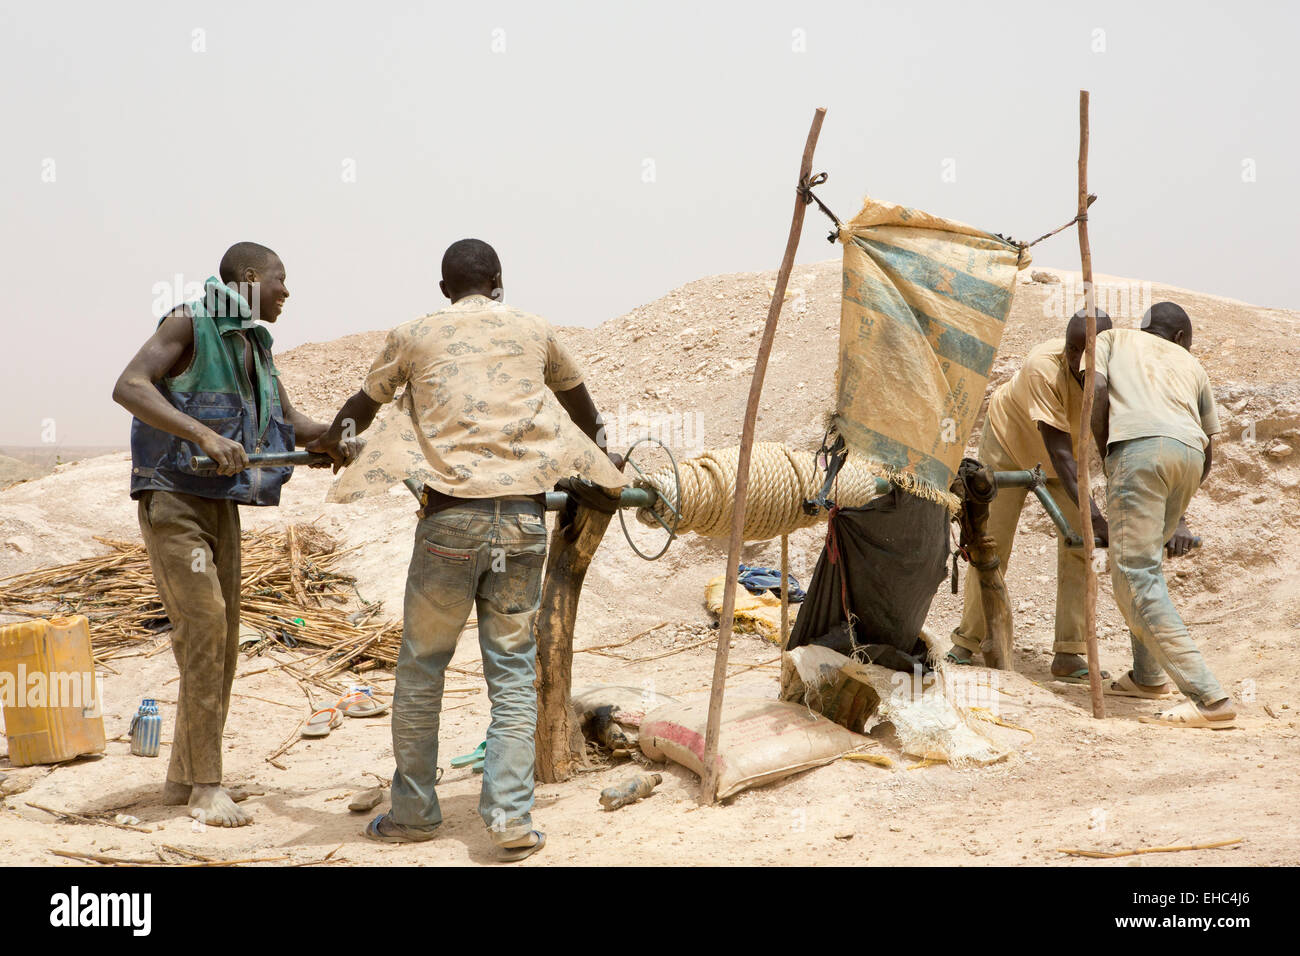 Komobangau gold mines, Niger, 18th May 2012:  Miners at work.  It is Friday and while most people take this as a day of rest some miners are still keen to work.  Photograph by Mike Goldwater Stock Photo